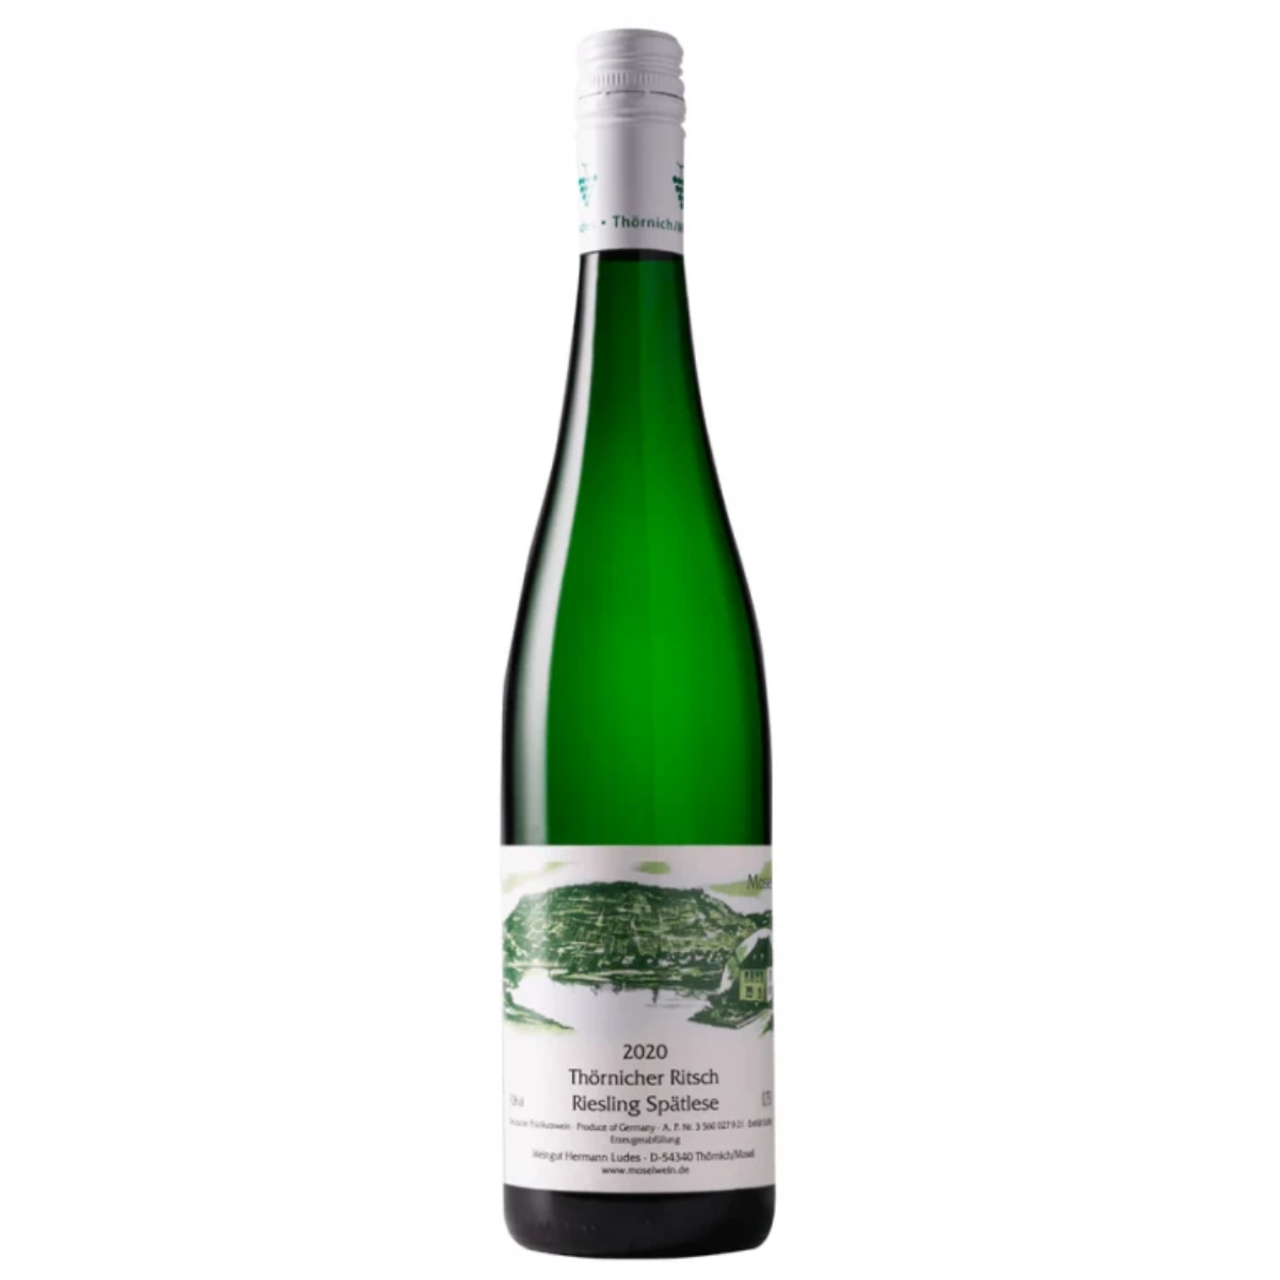 Riesling Spatlese Ludes, Hermann Reverie Thornicher - Ritsch Mosel Vinous 2020